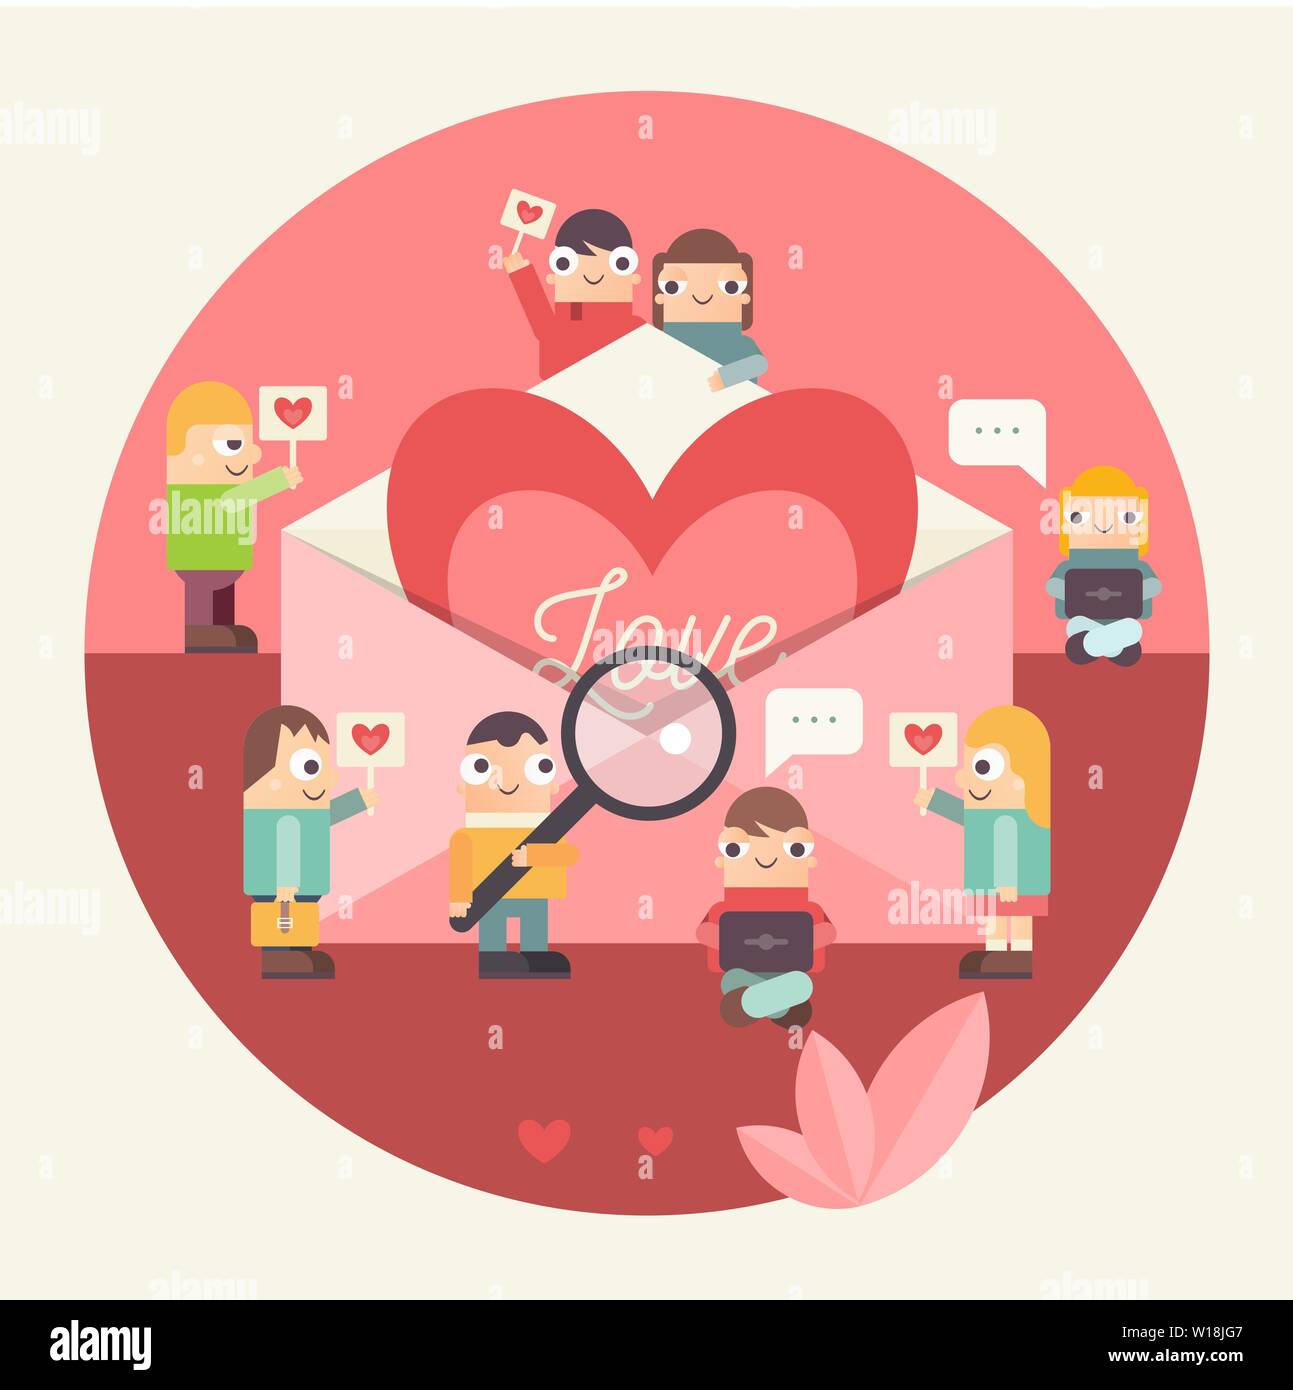 Online Dating Concept. Cute Cartoon People Send Love Email Messages via Mobile Gadgets. Idea of Internet or Remote Relationship. Flat Big Heart in Env Stock Vector